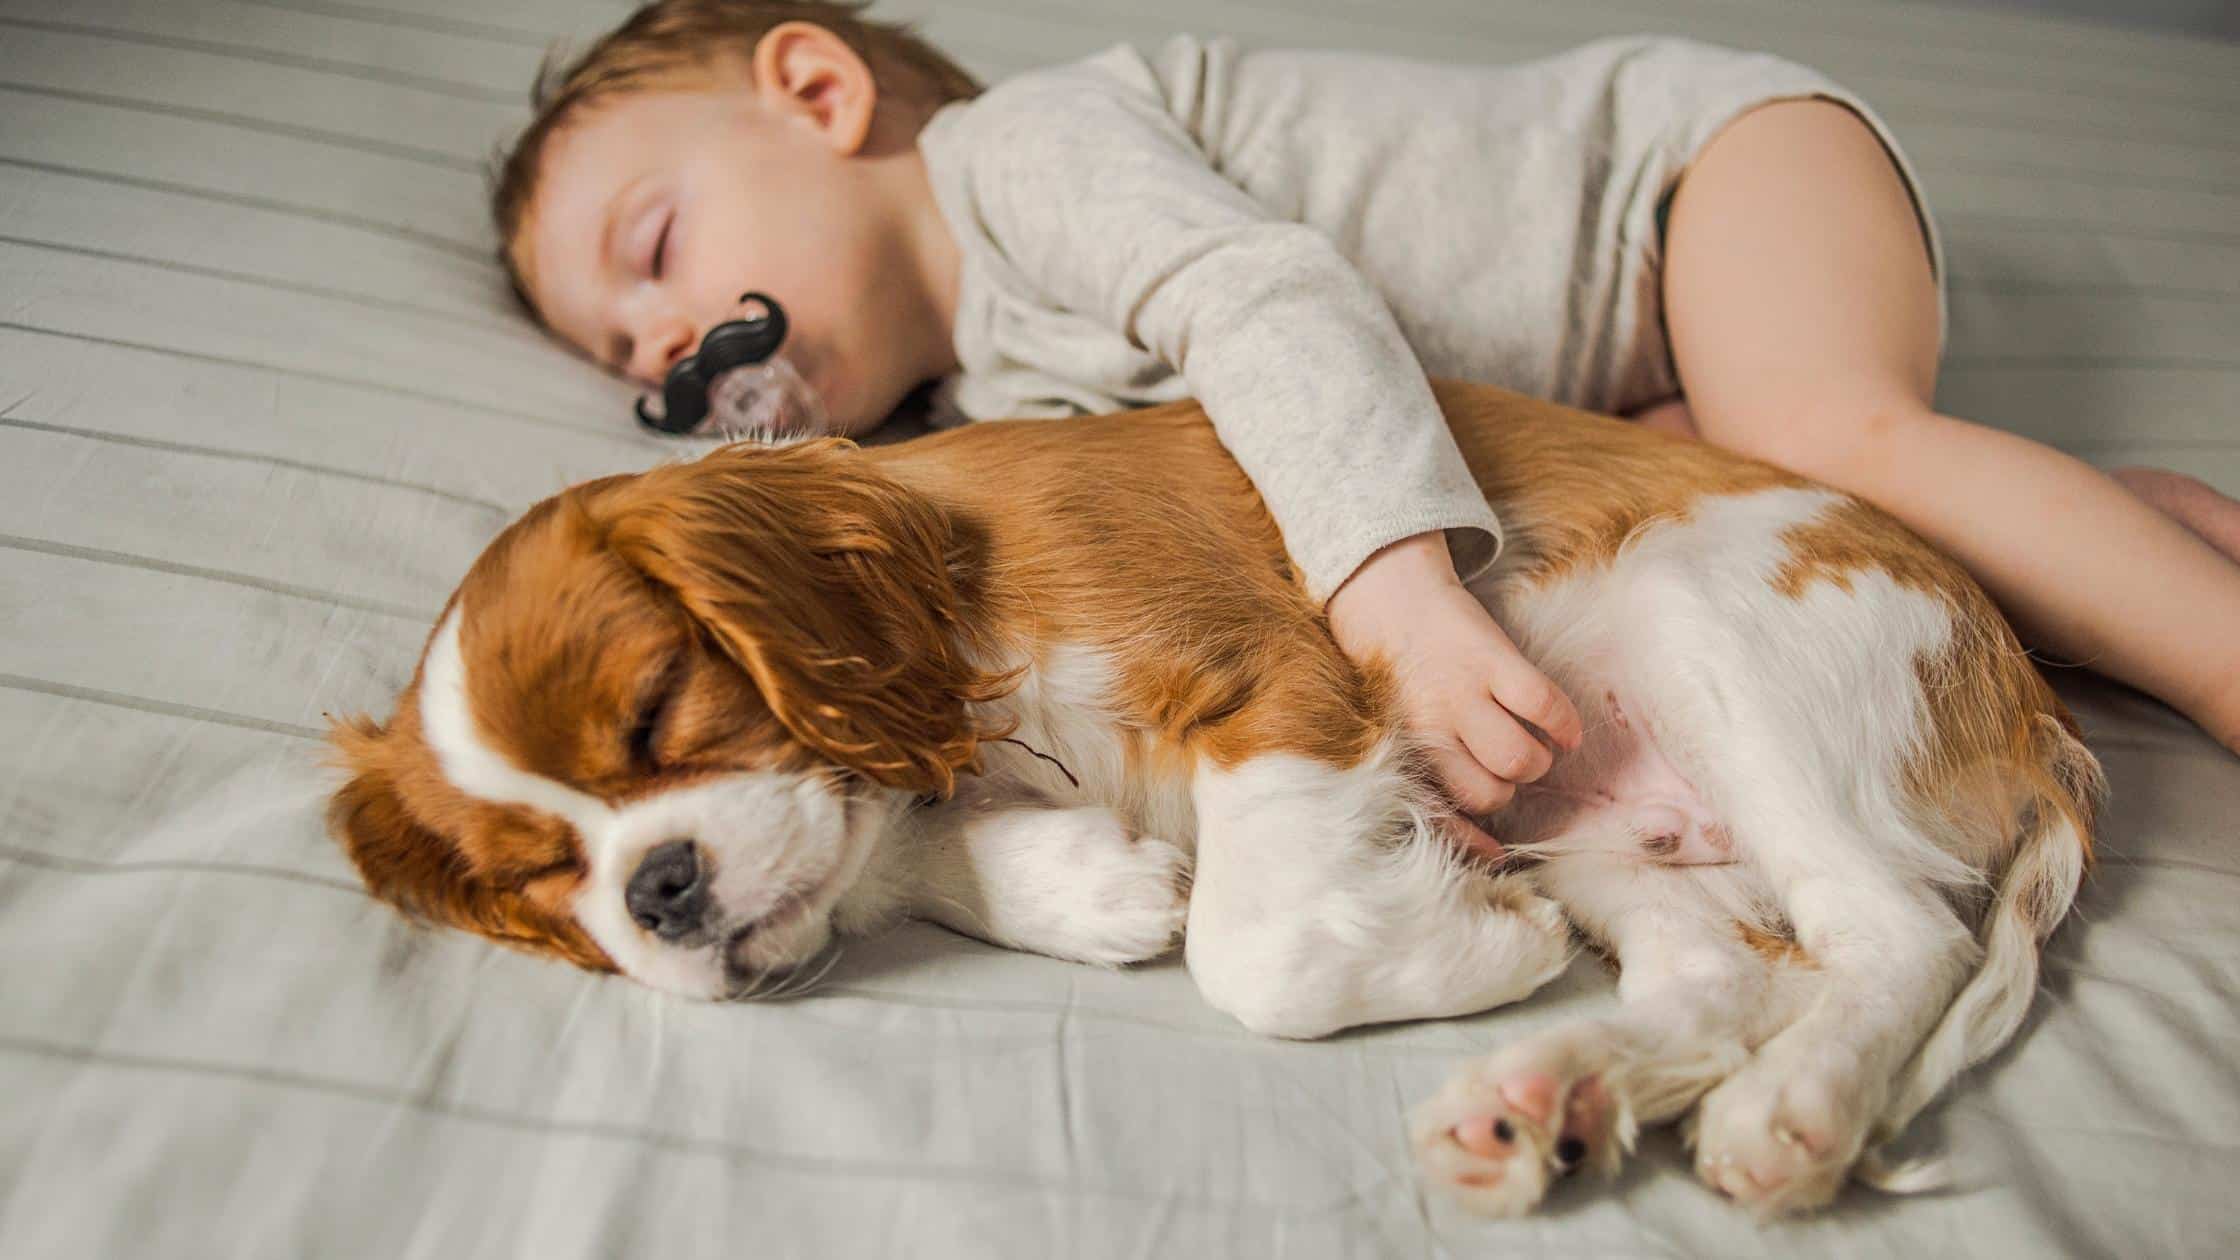 baby sleeping with puppy